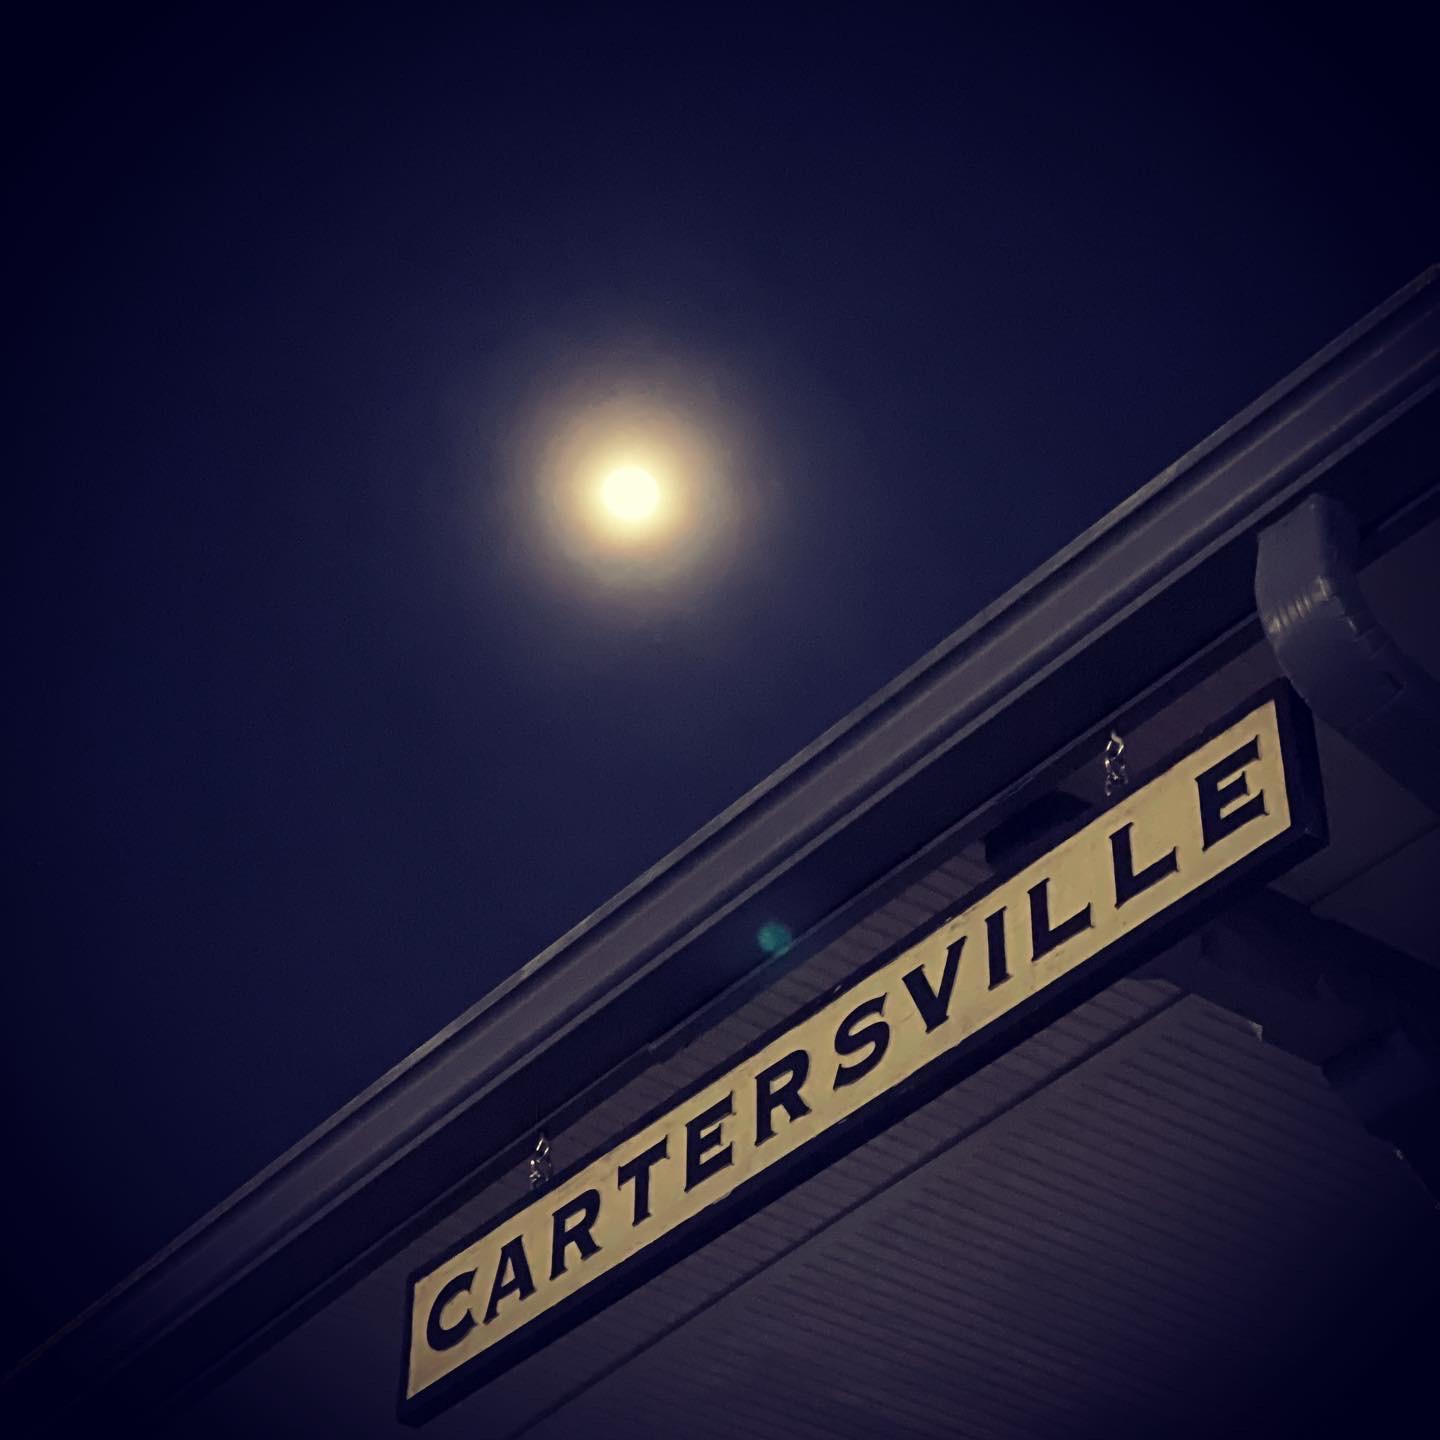 Getting Connected in Cartersville, Georgia